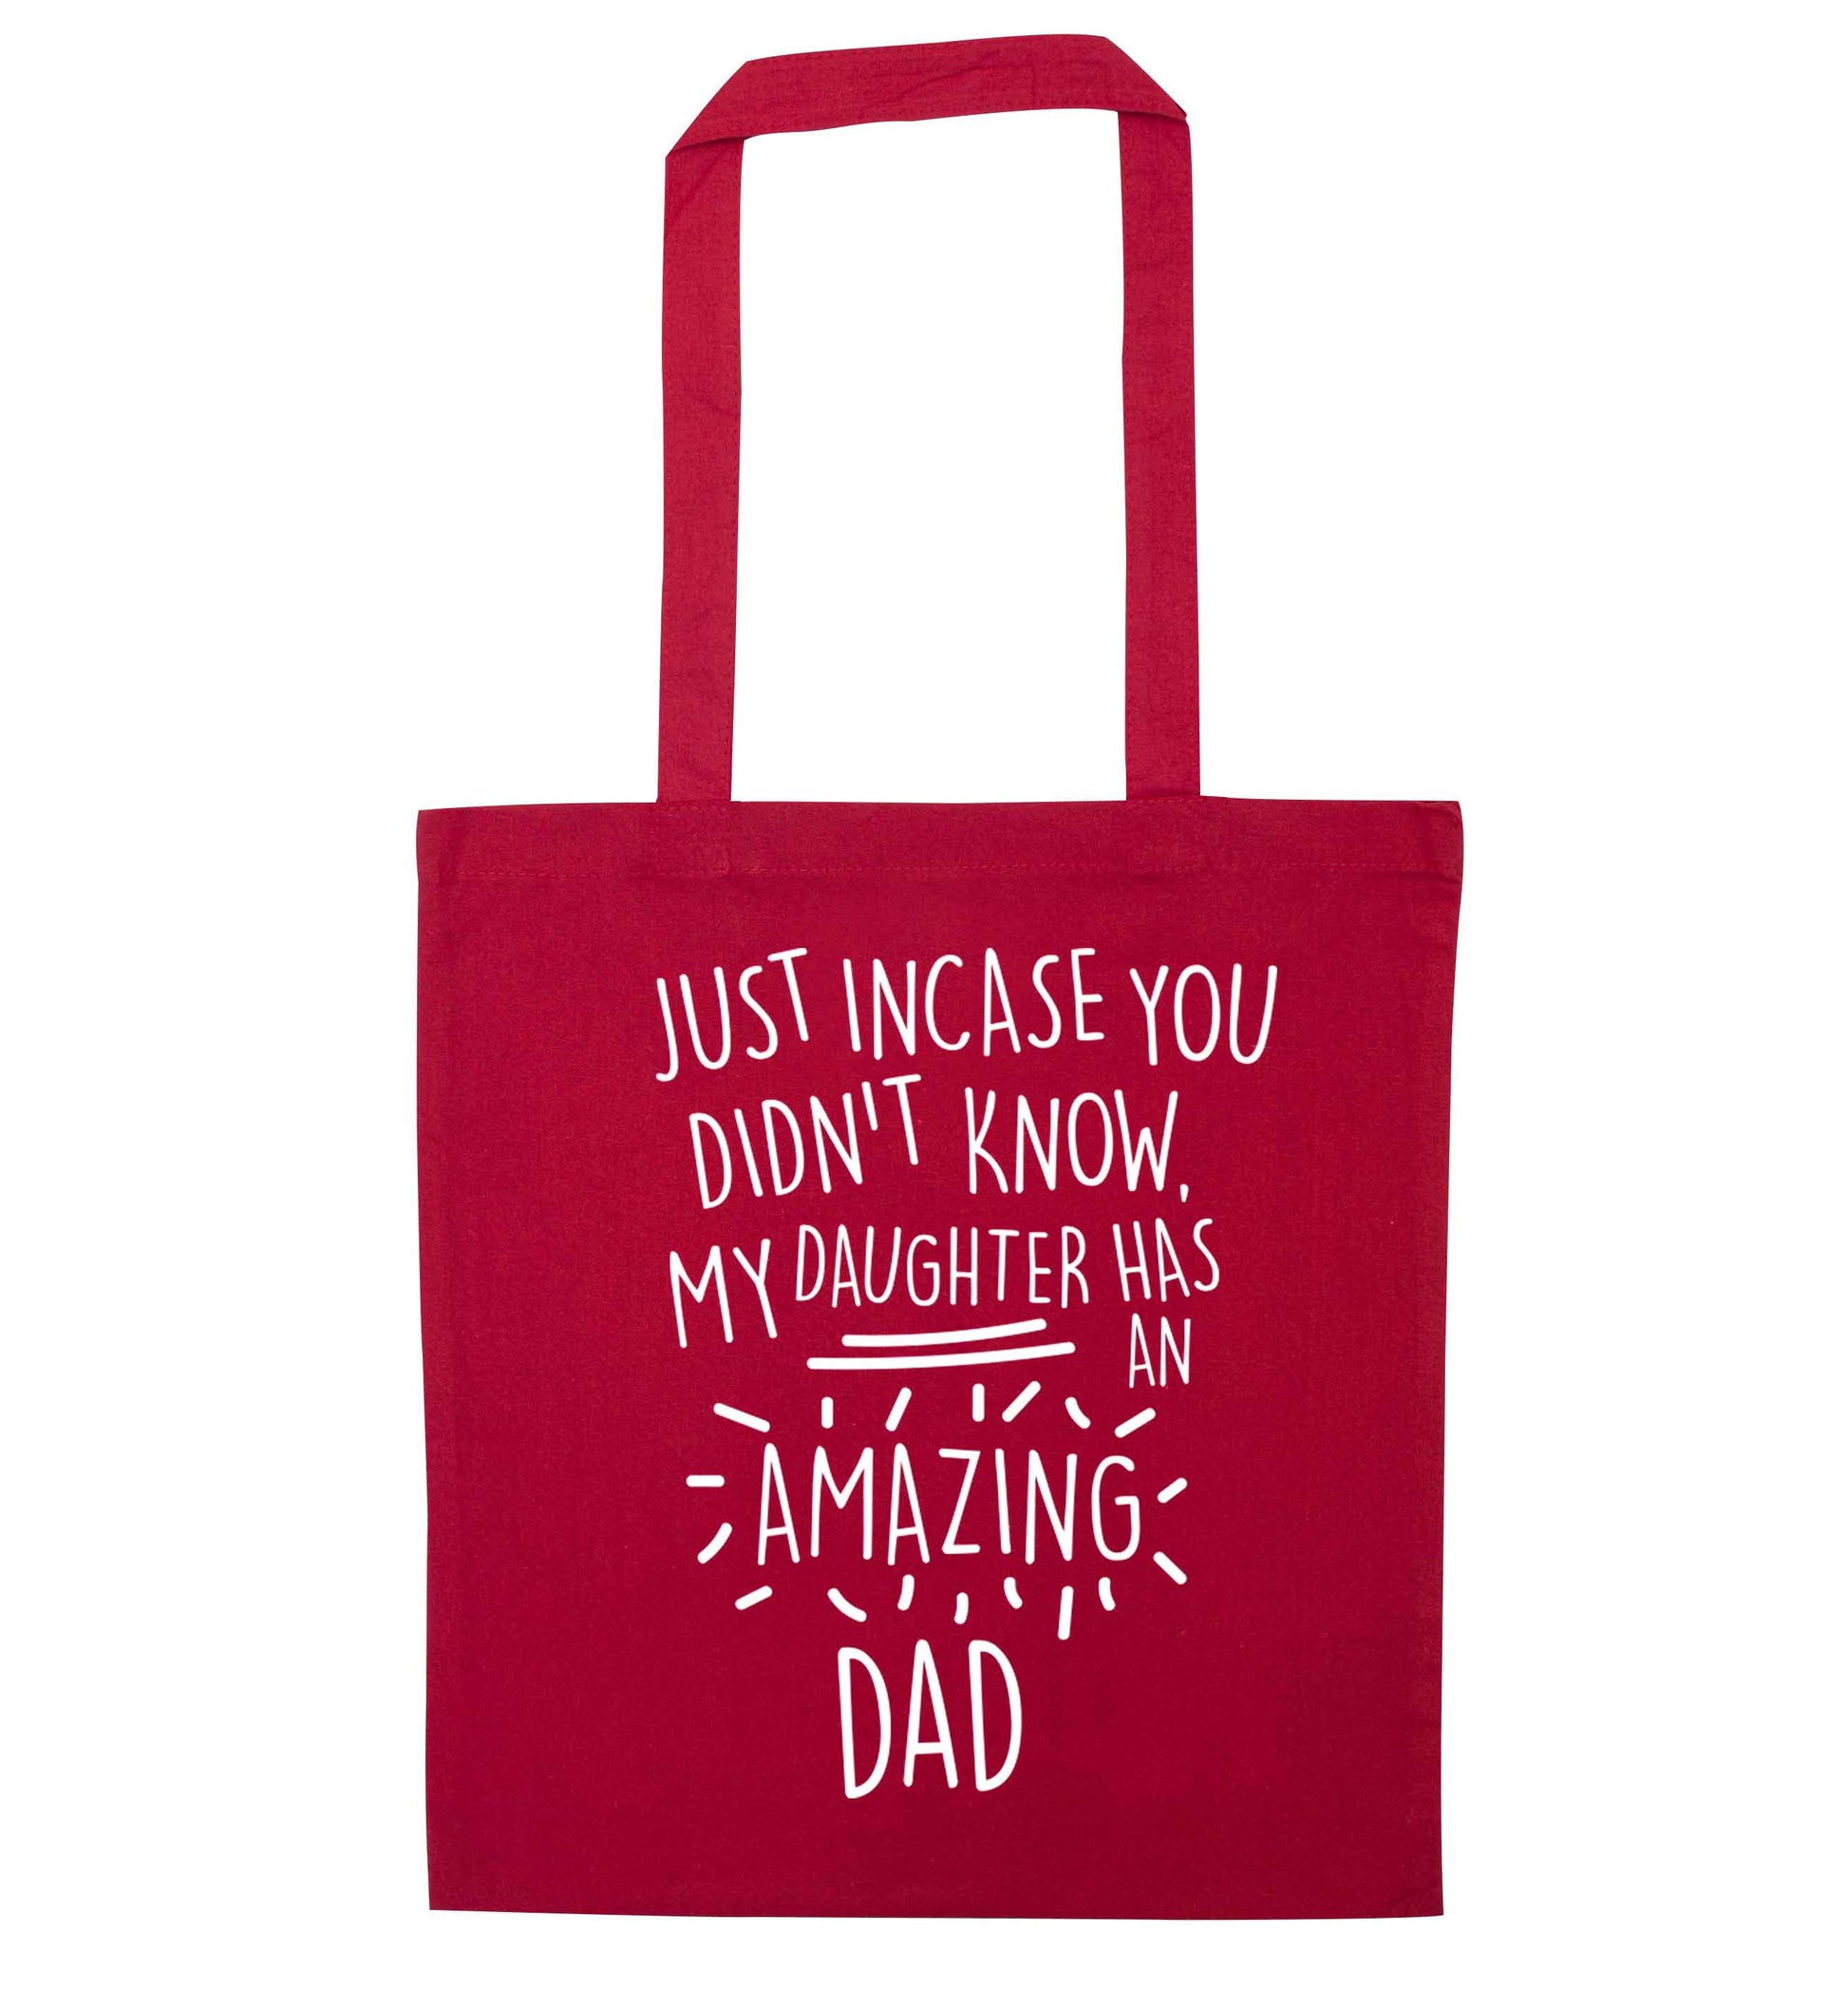 Just incase you didn't know my daughter has an amazing dad red tote bag